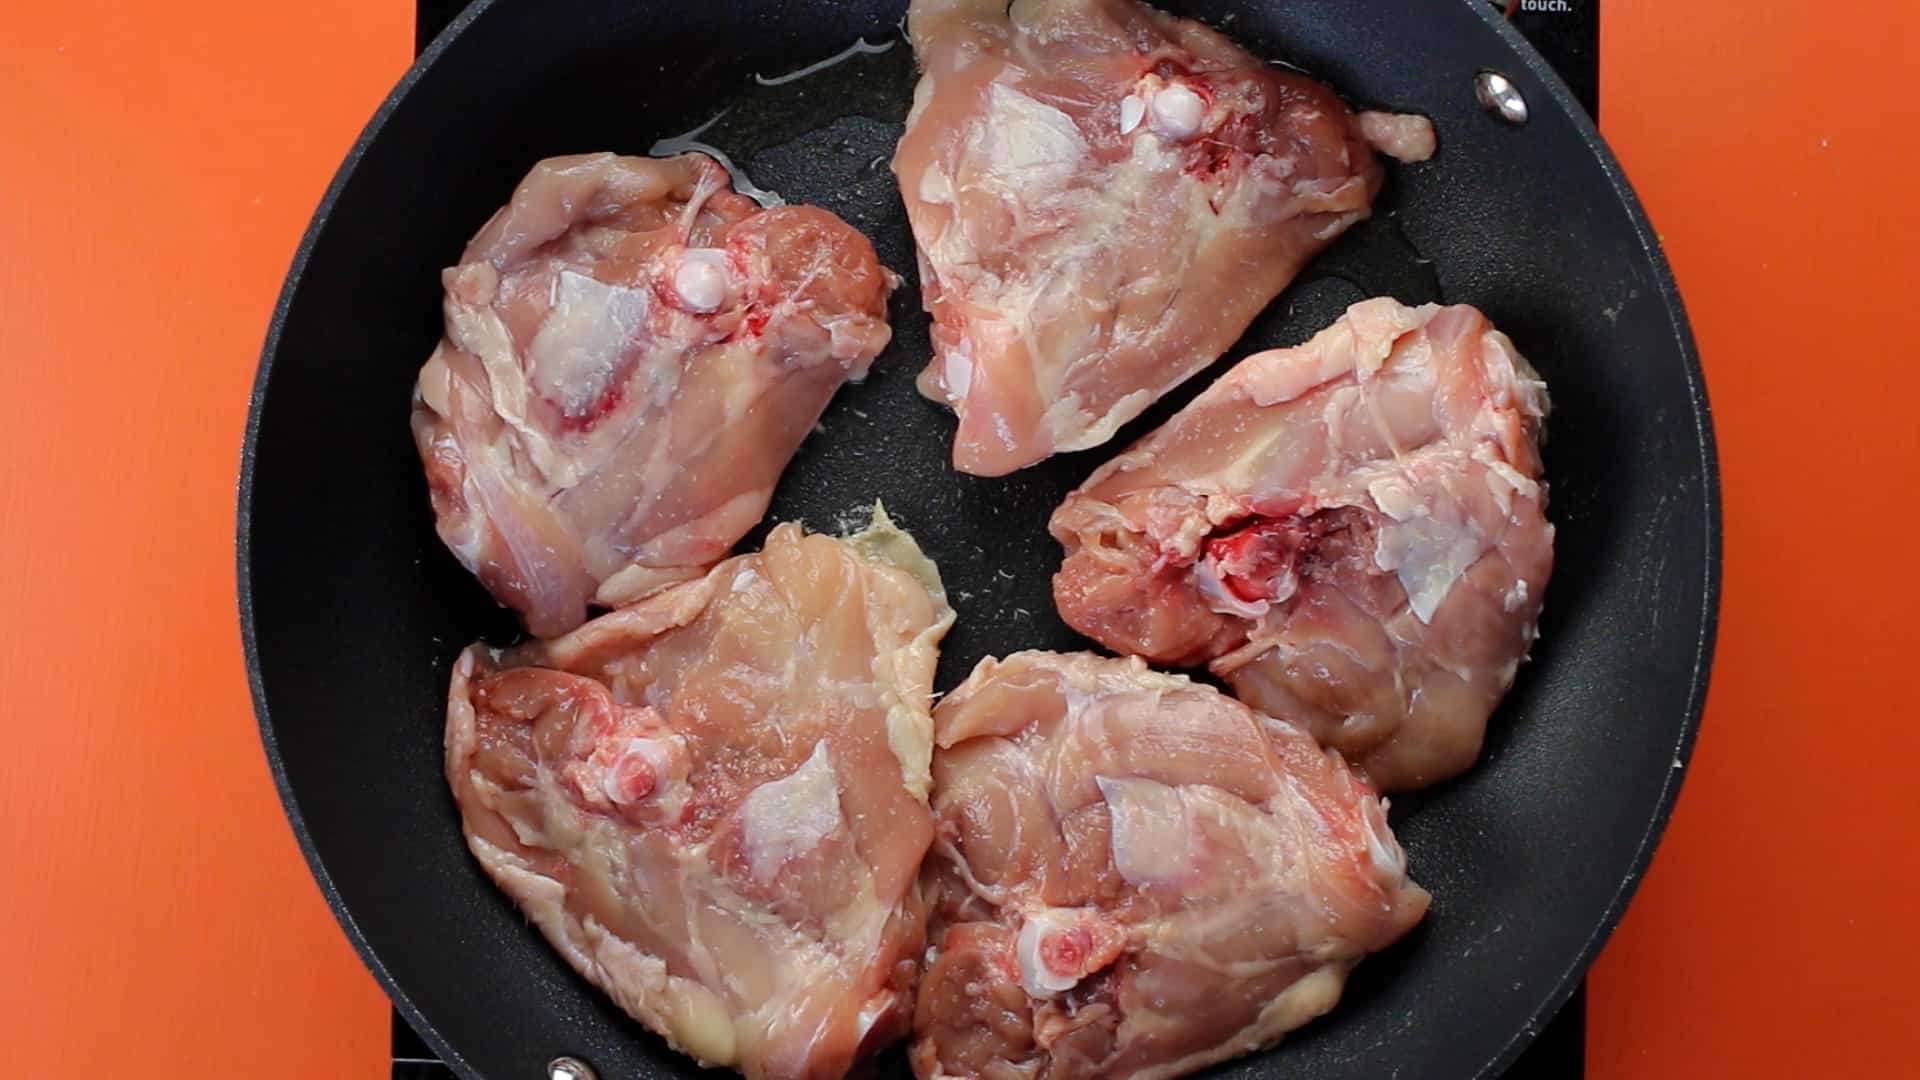 Chicken thighs skin side down in frying in a pan on a stove on an orange background.